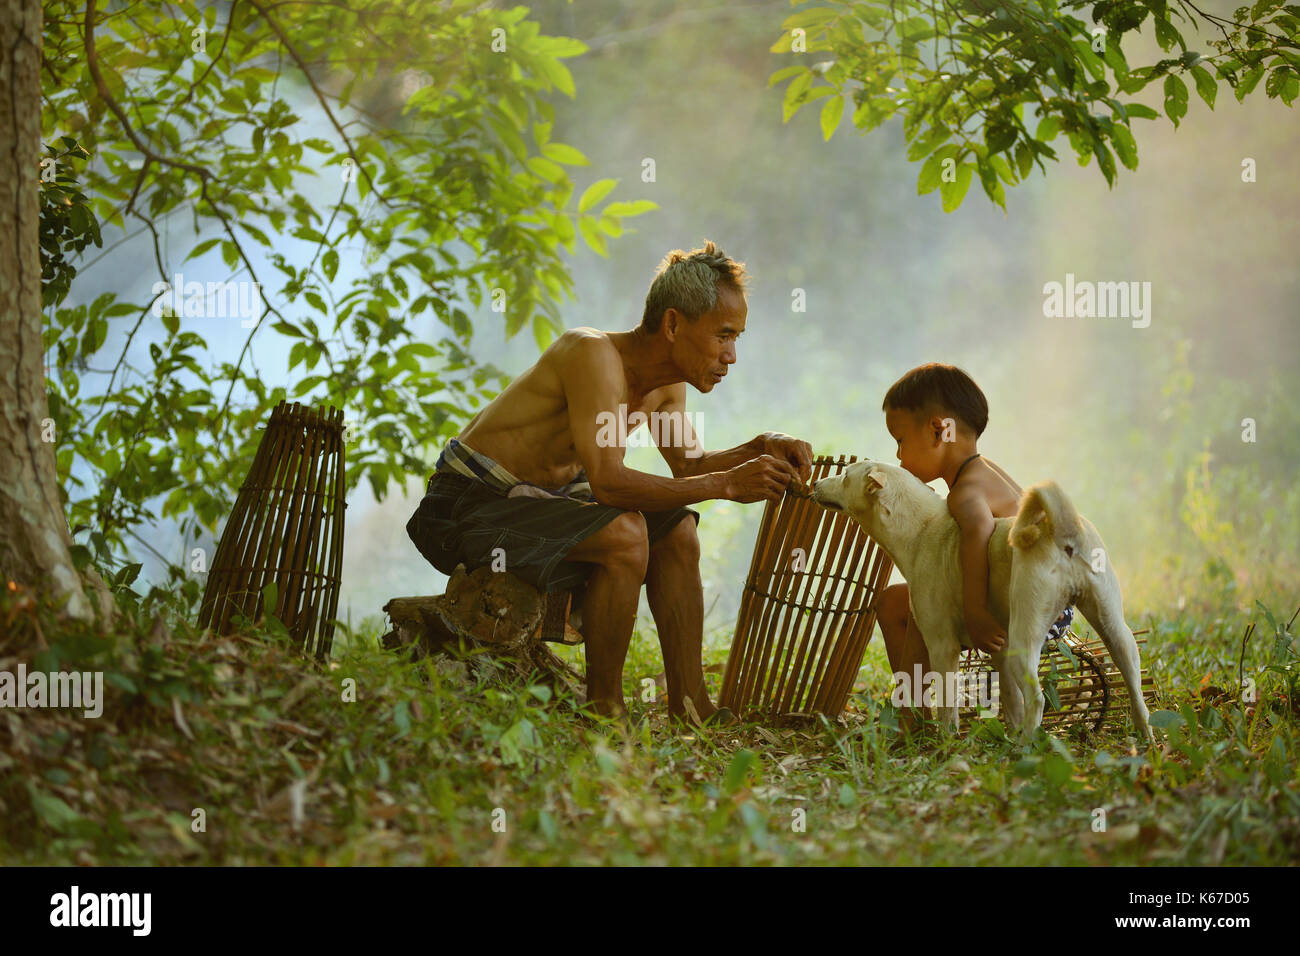 Grandfather and grandson sitting in forest playing with a dog, Thailand Stock Photo